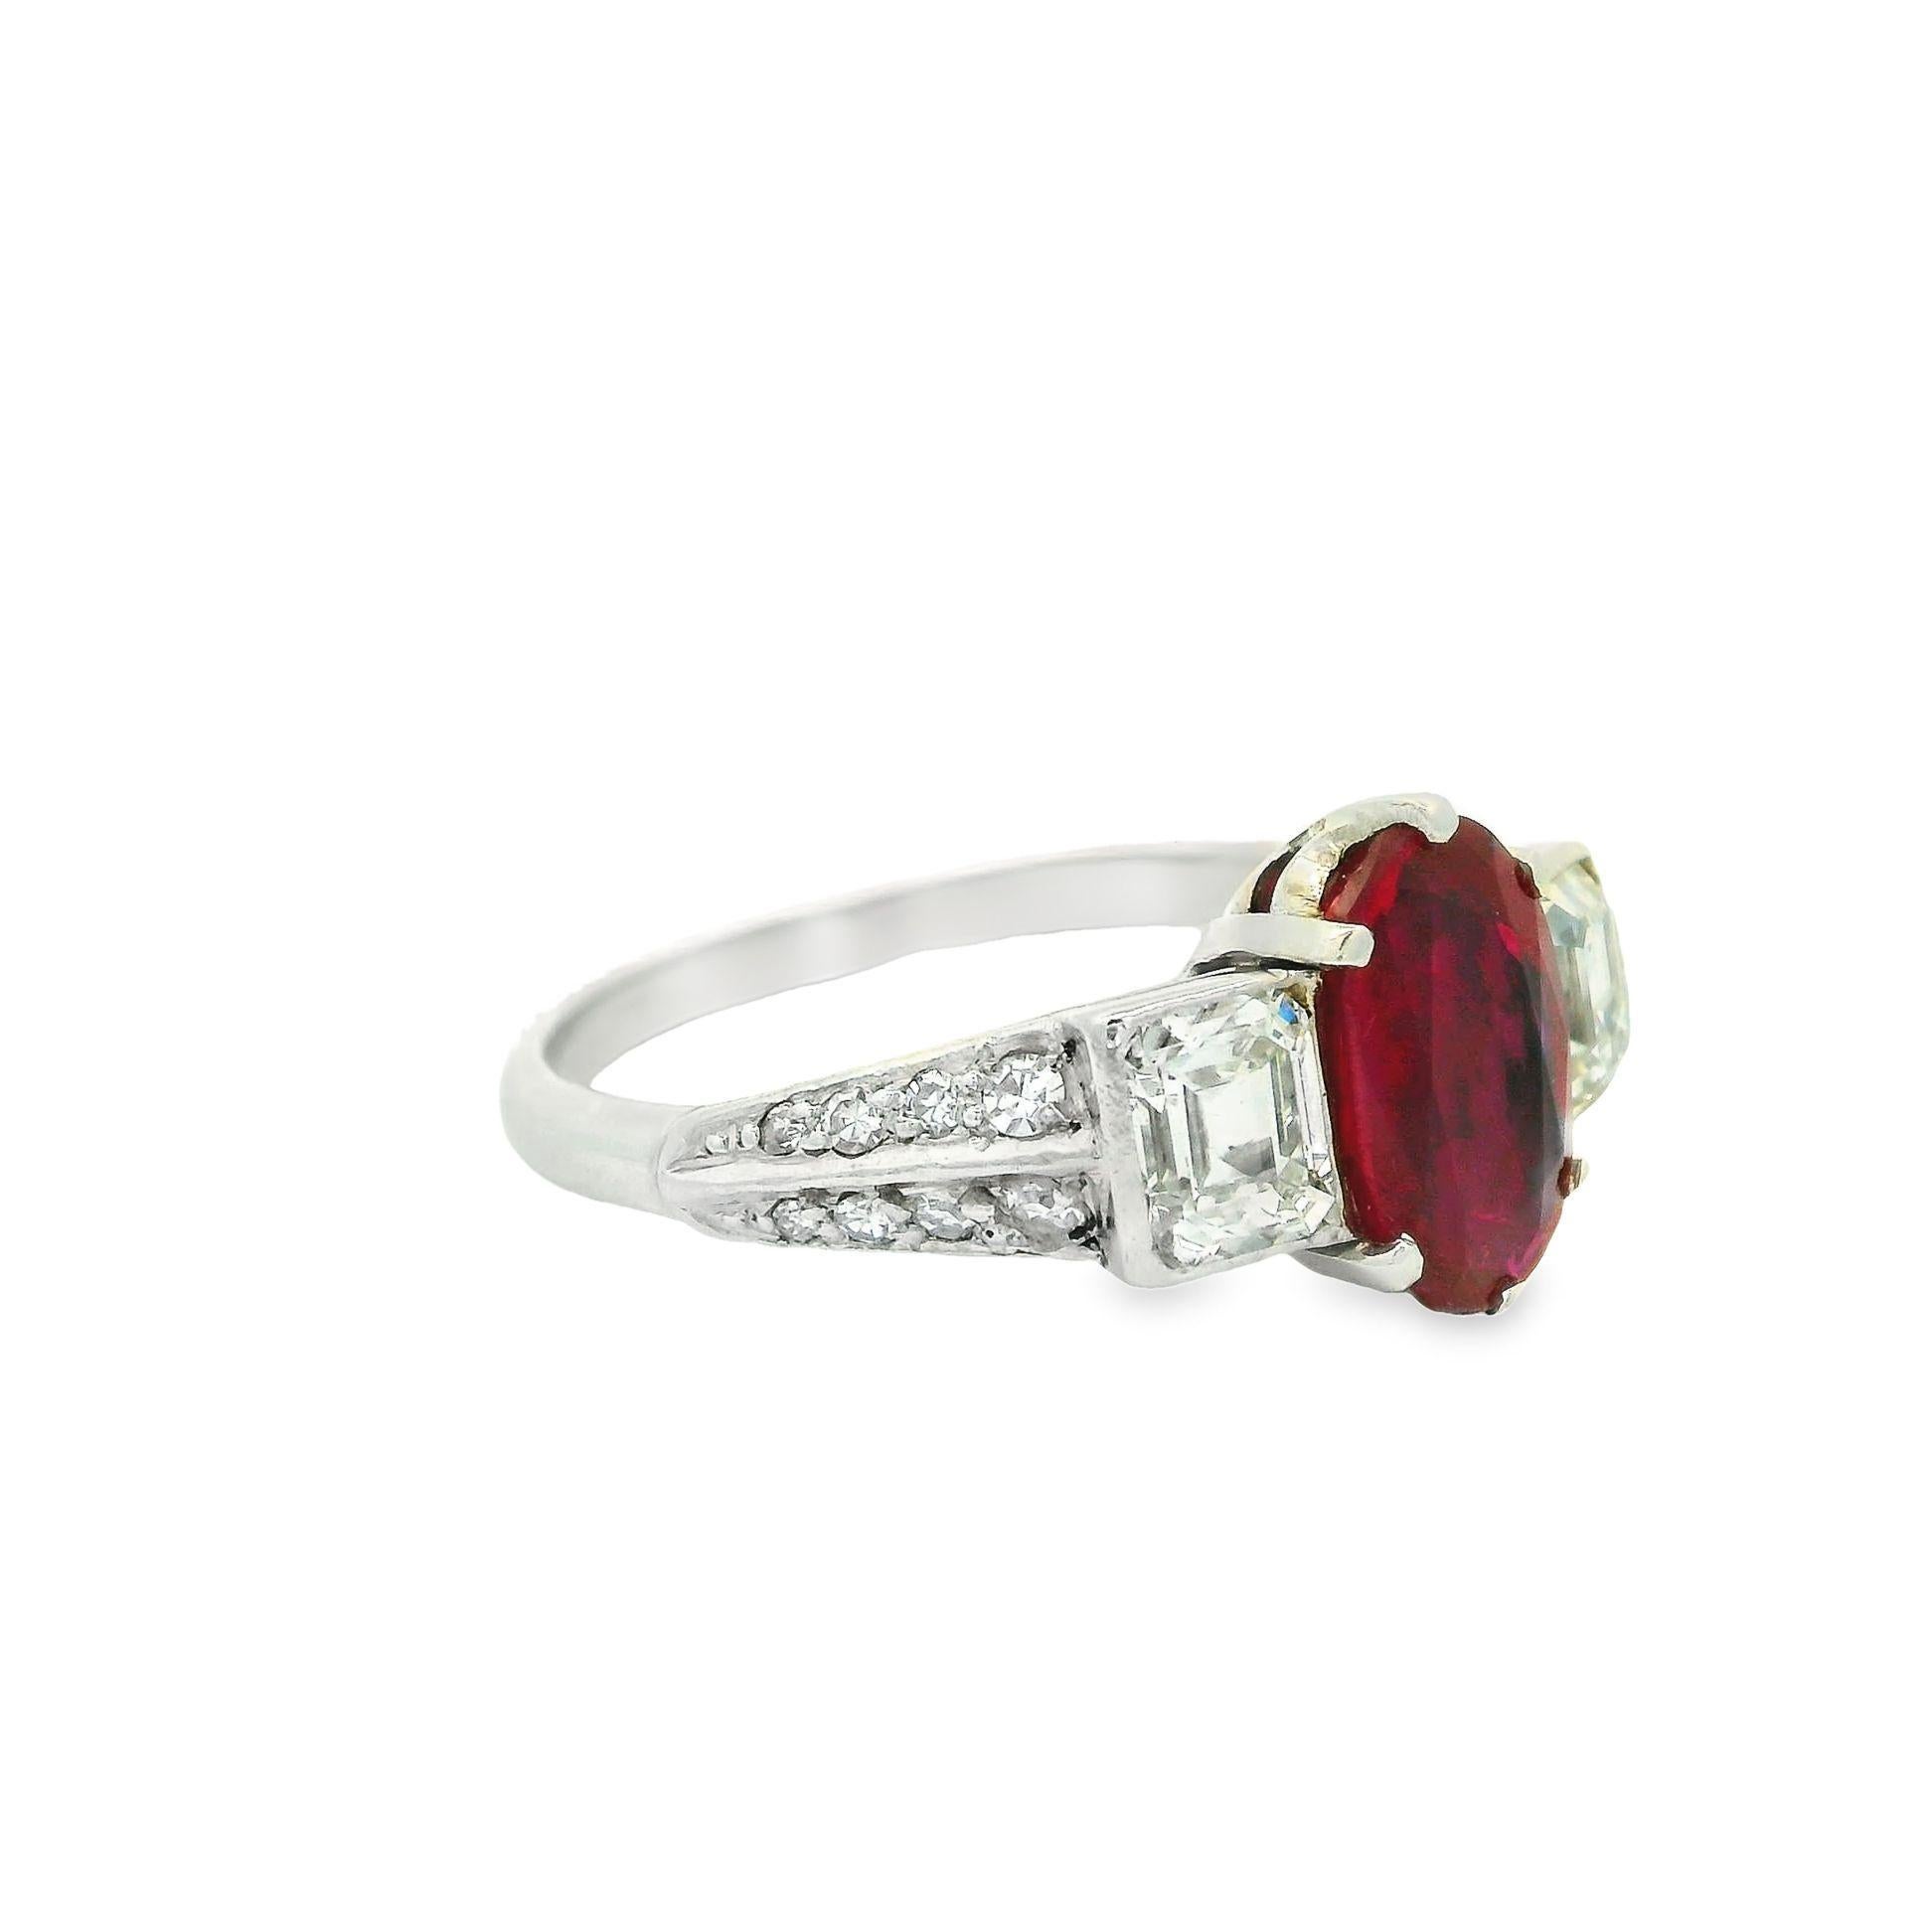 A beautiful treasure from the 1920’s! This lovely antique platinum ring features rare Burmese ruby with no treatment of any kind. It has a rich intense pure red color and weighs approximately 1.50 carats. It is certified by the GIA as a Burmese